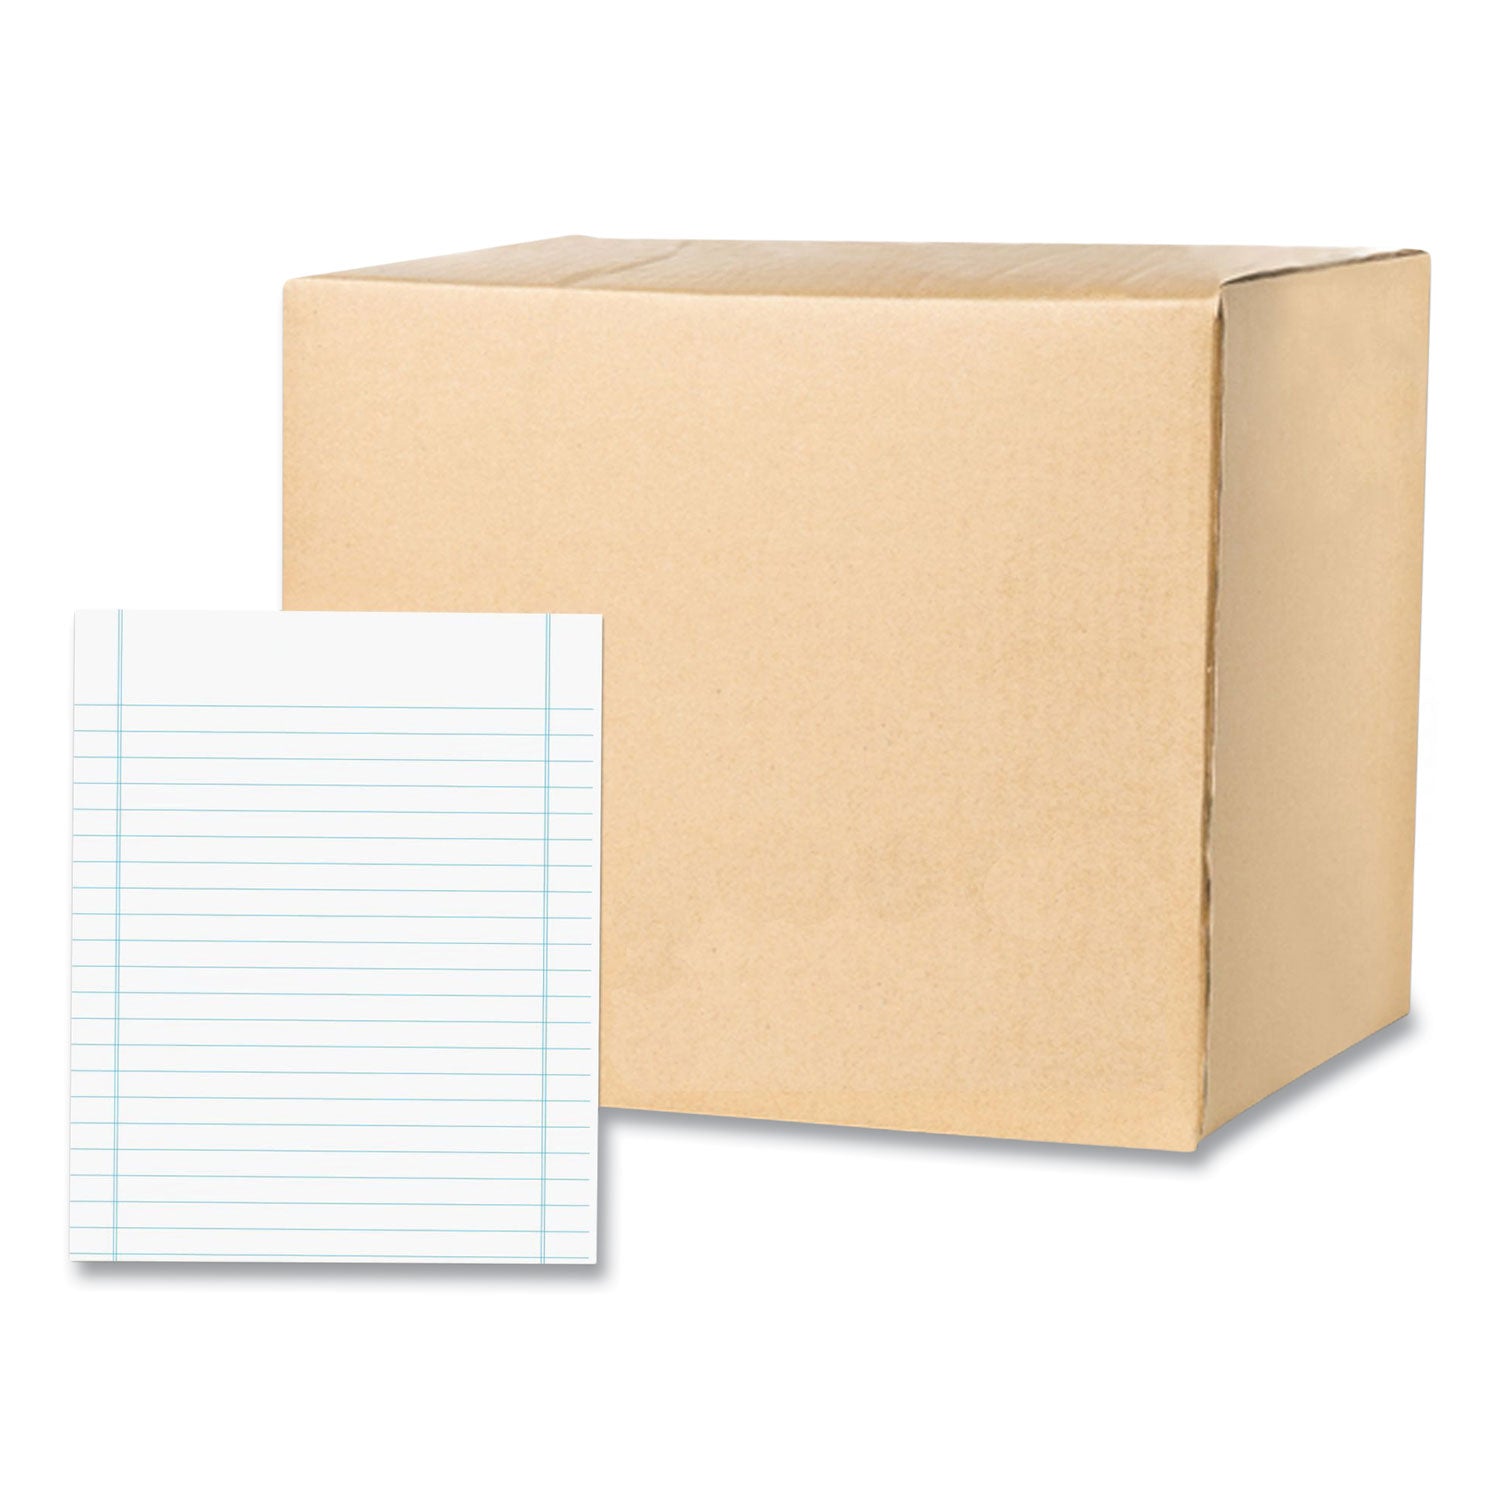 new-york-exam-paper-8-x-10-wide-legal-rule-250-sheets-pack-10-packs-carton-ships-in-4-6-business-days_roa77522cs - 1